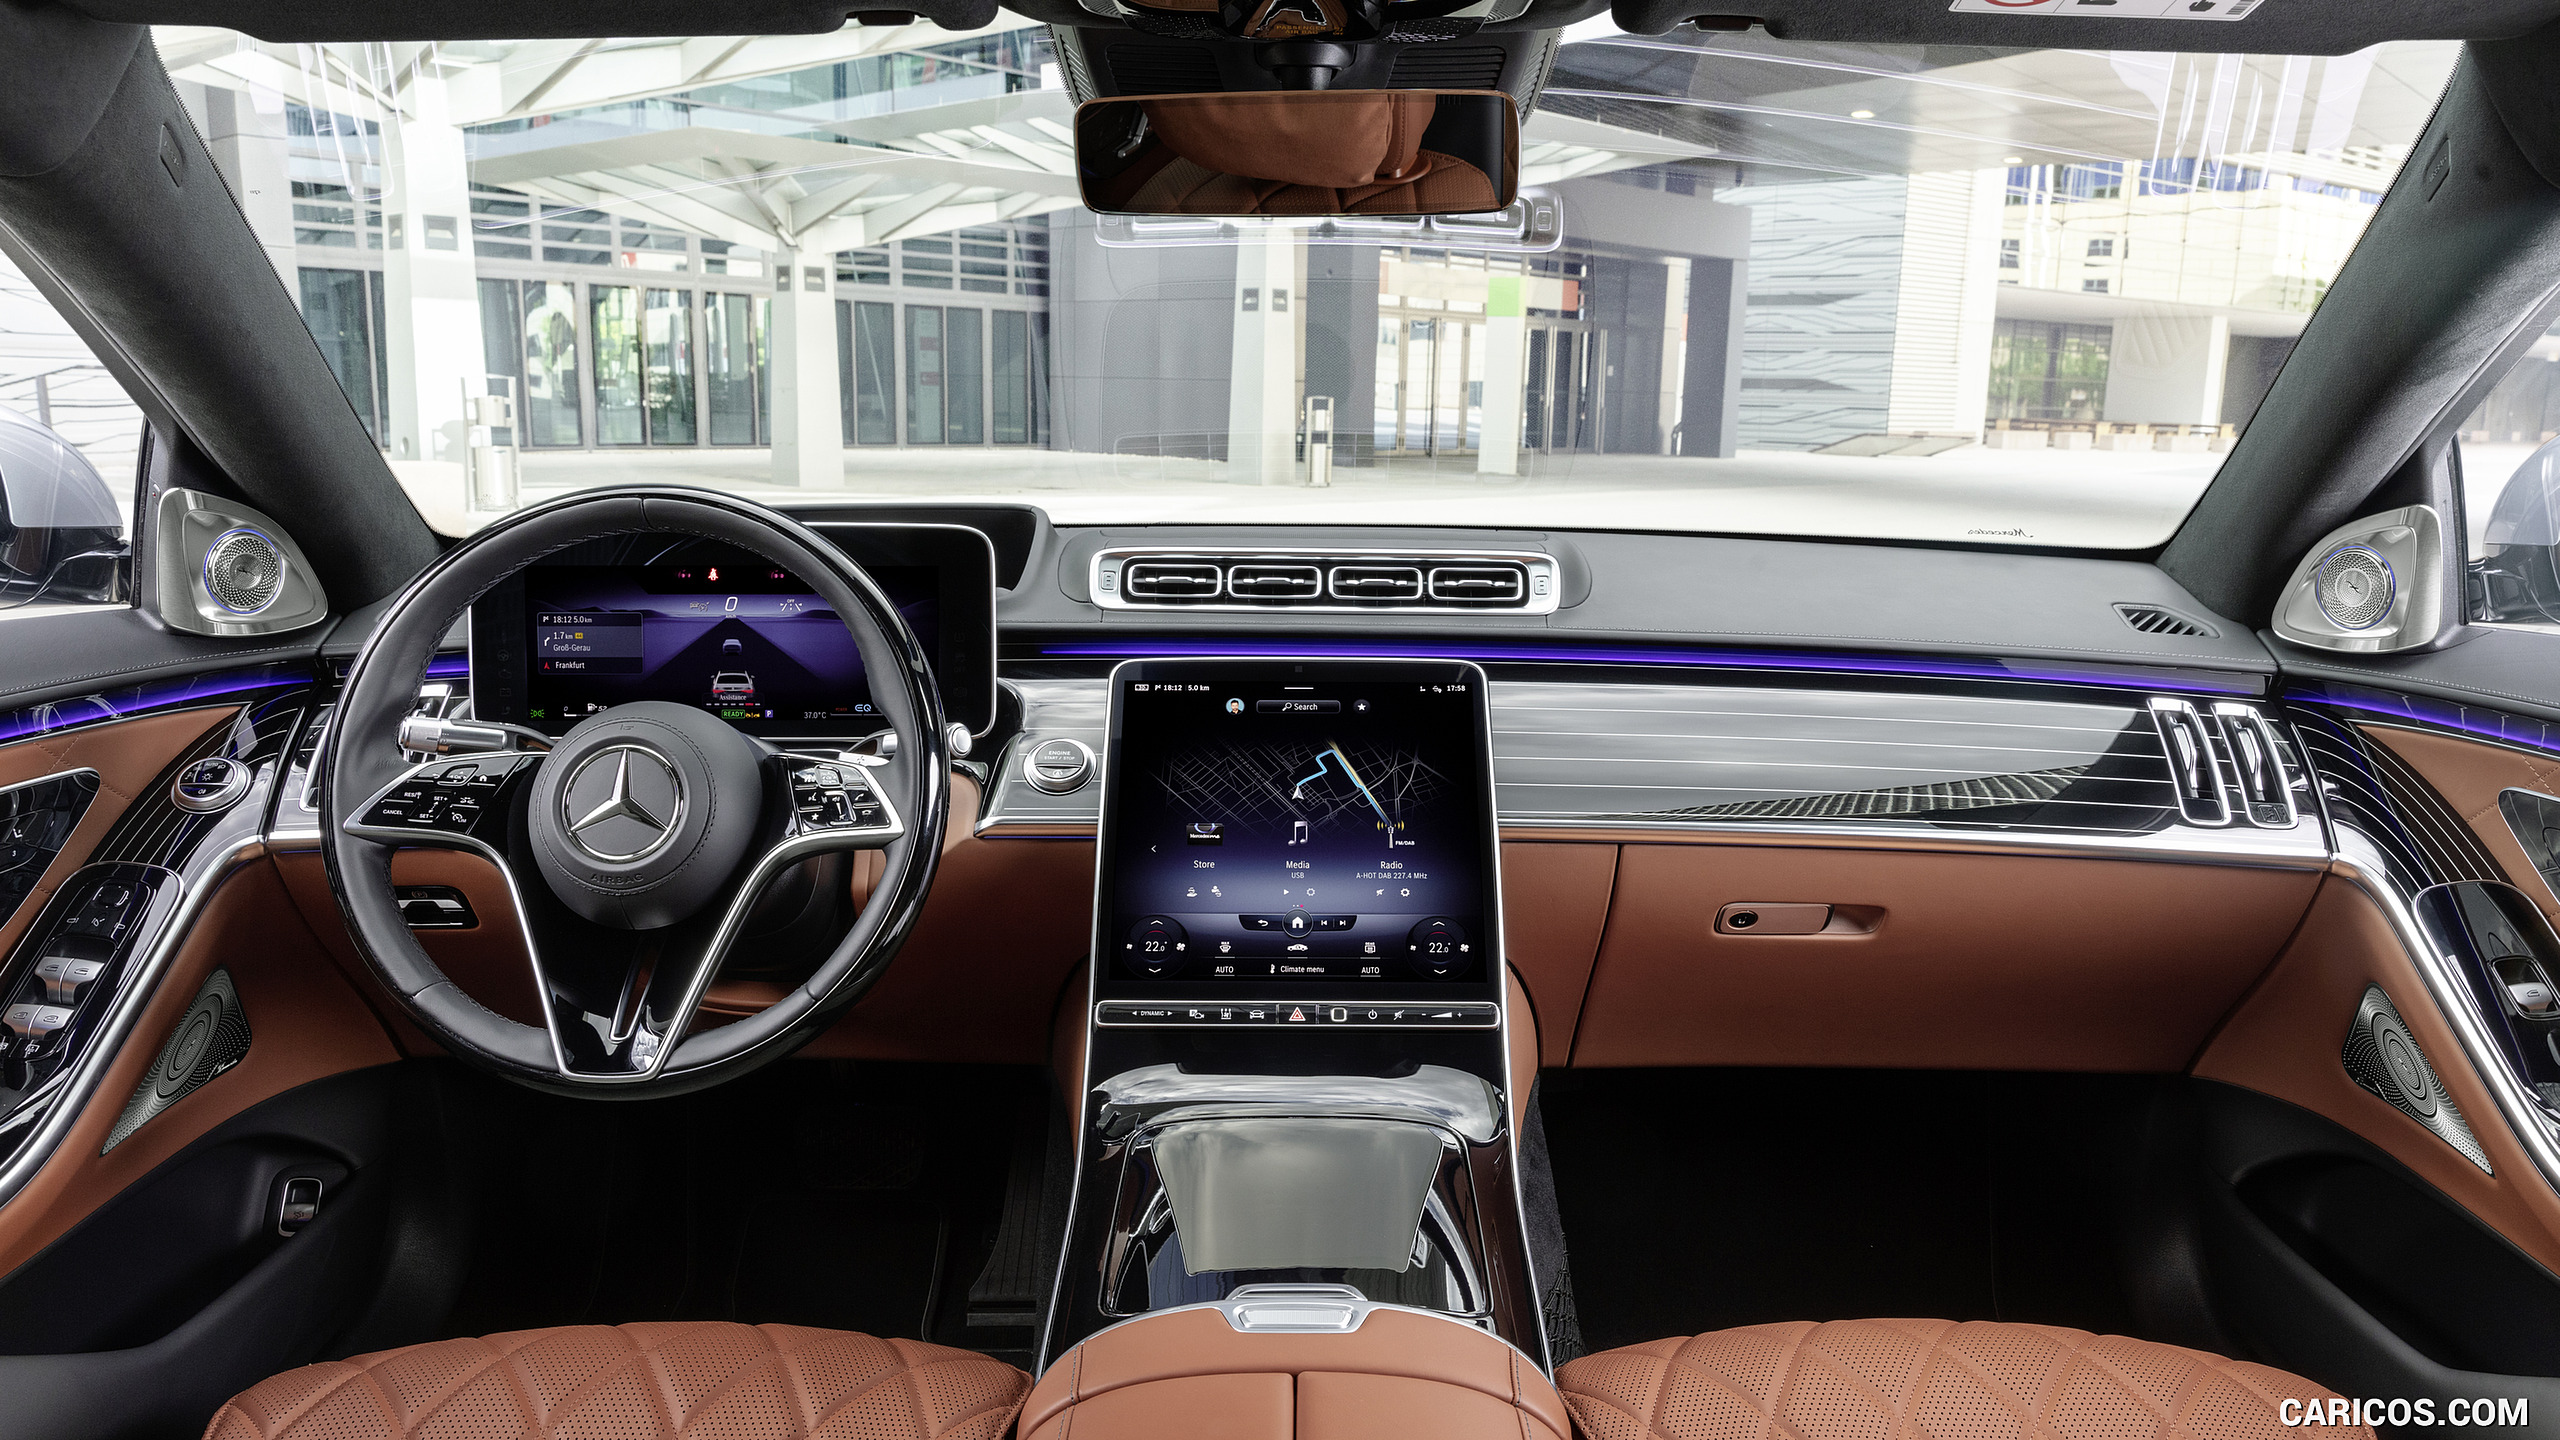 2021 Mercedes-Benz S-Class (Color: Leather Siena Brown) - Interior, Cockpit, #111 of 316